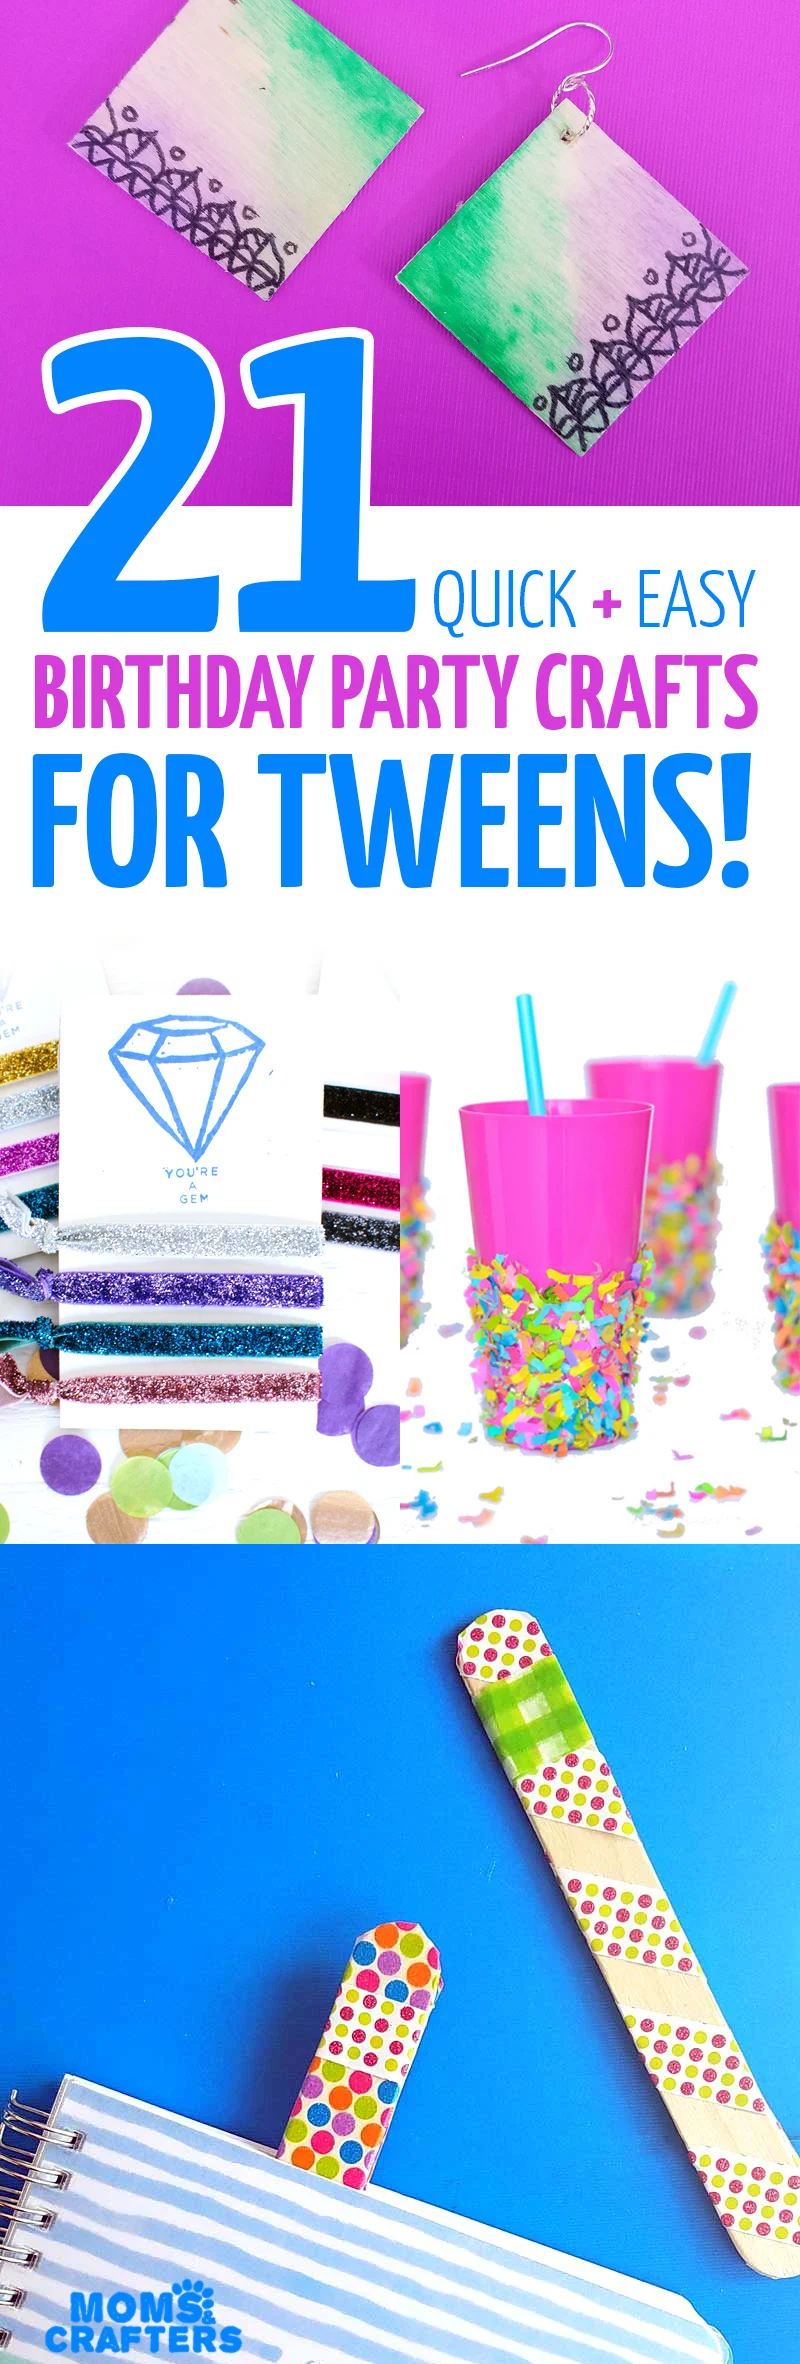 Birthday Party Crafts For Tweens Moms